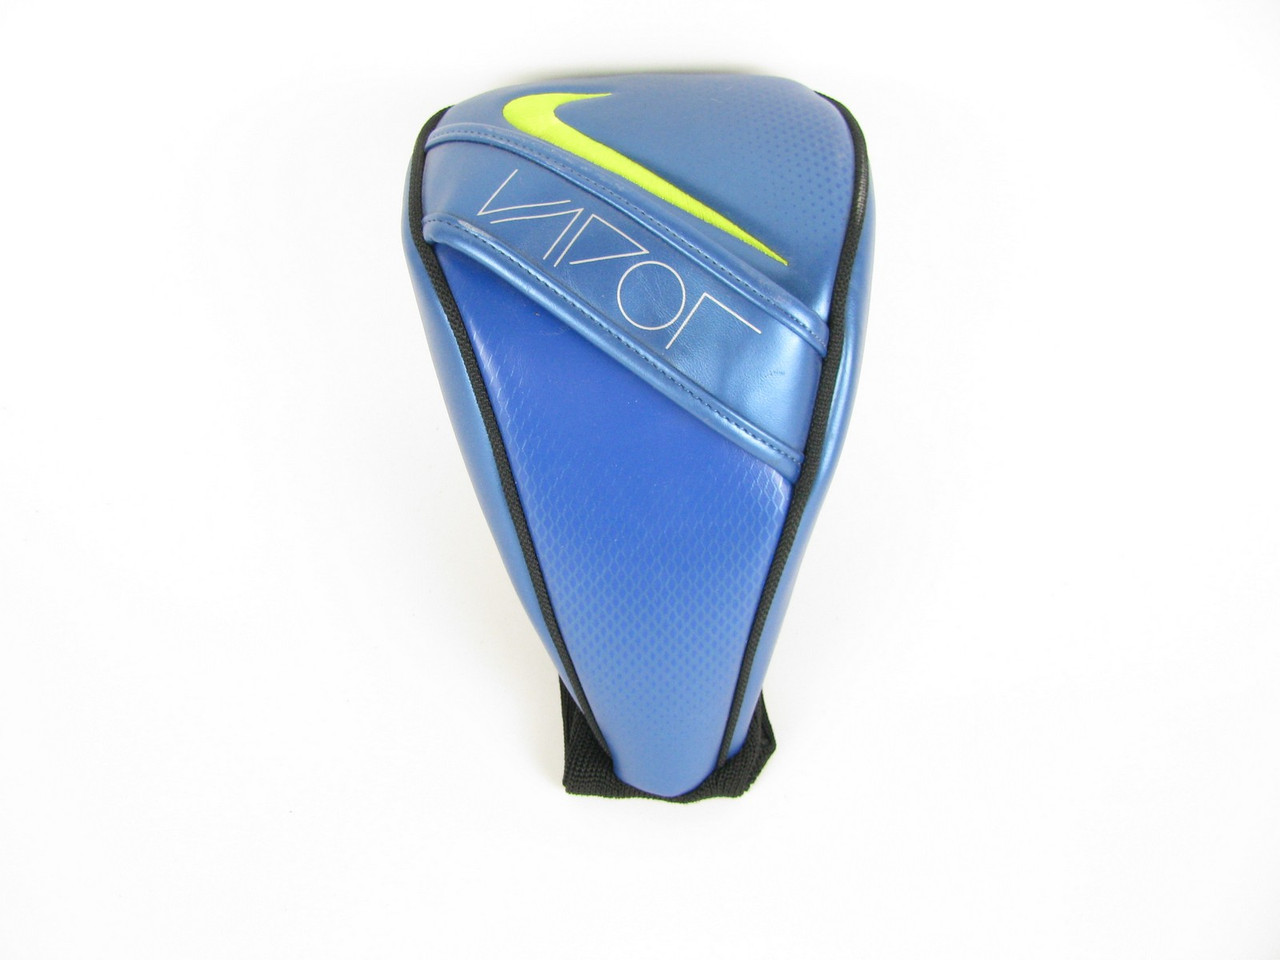 NEW Nike Vapor Fly Driver Headcover - Clubs n Covers Golf